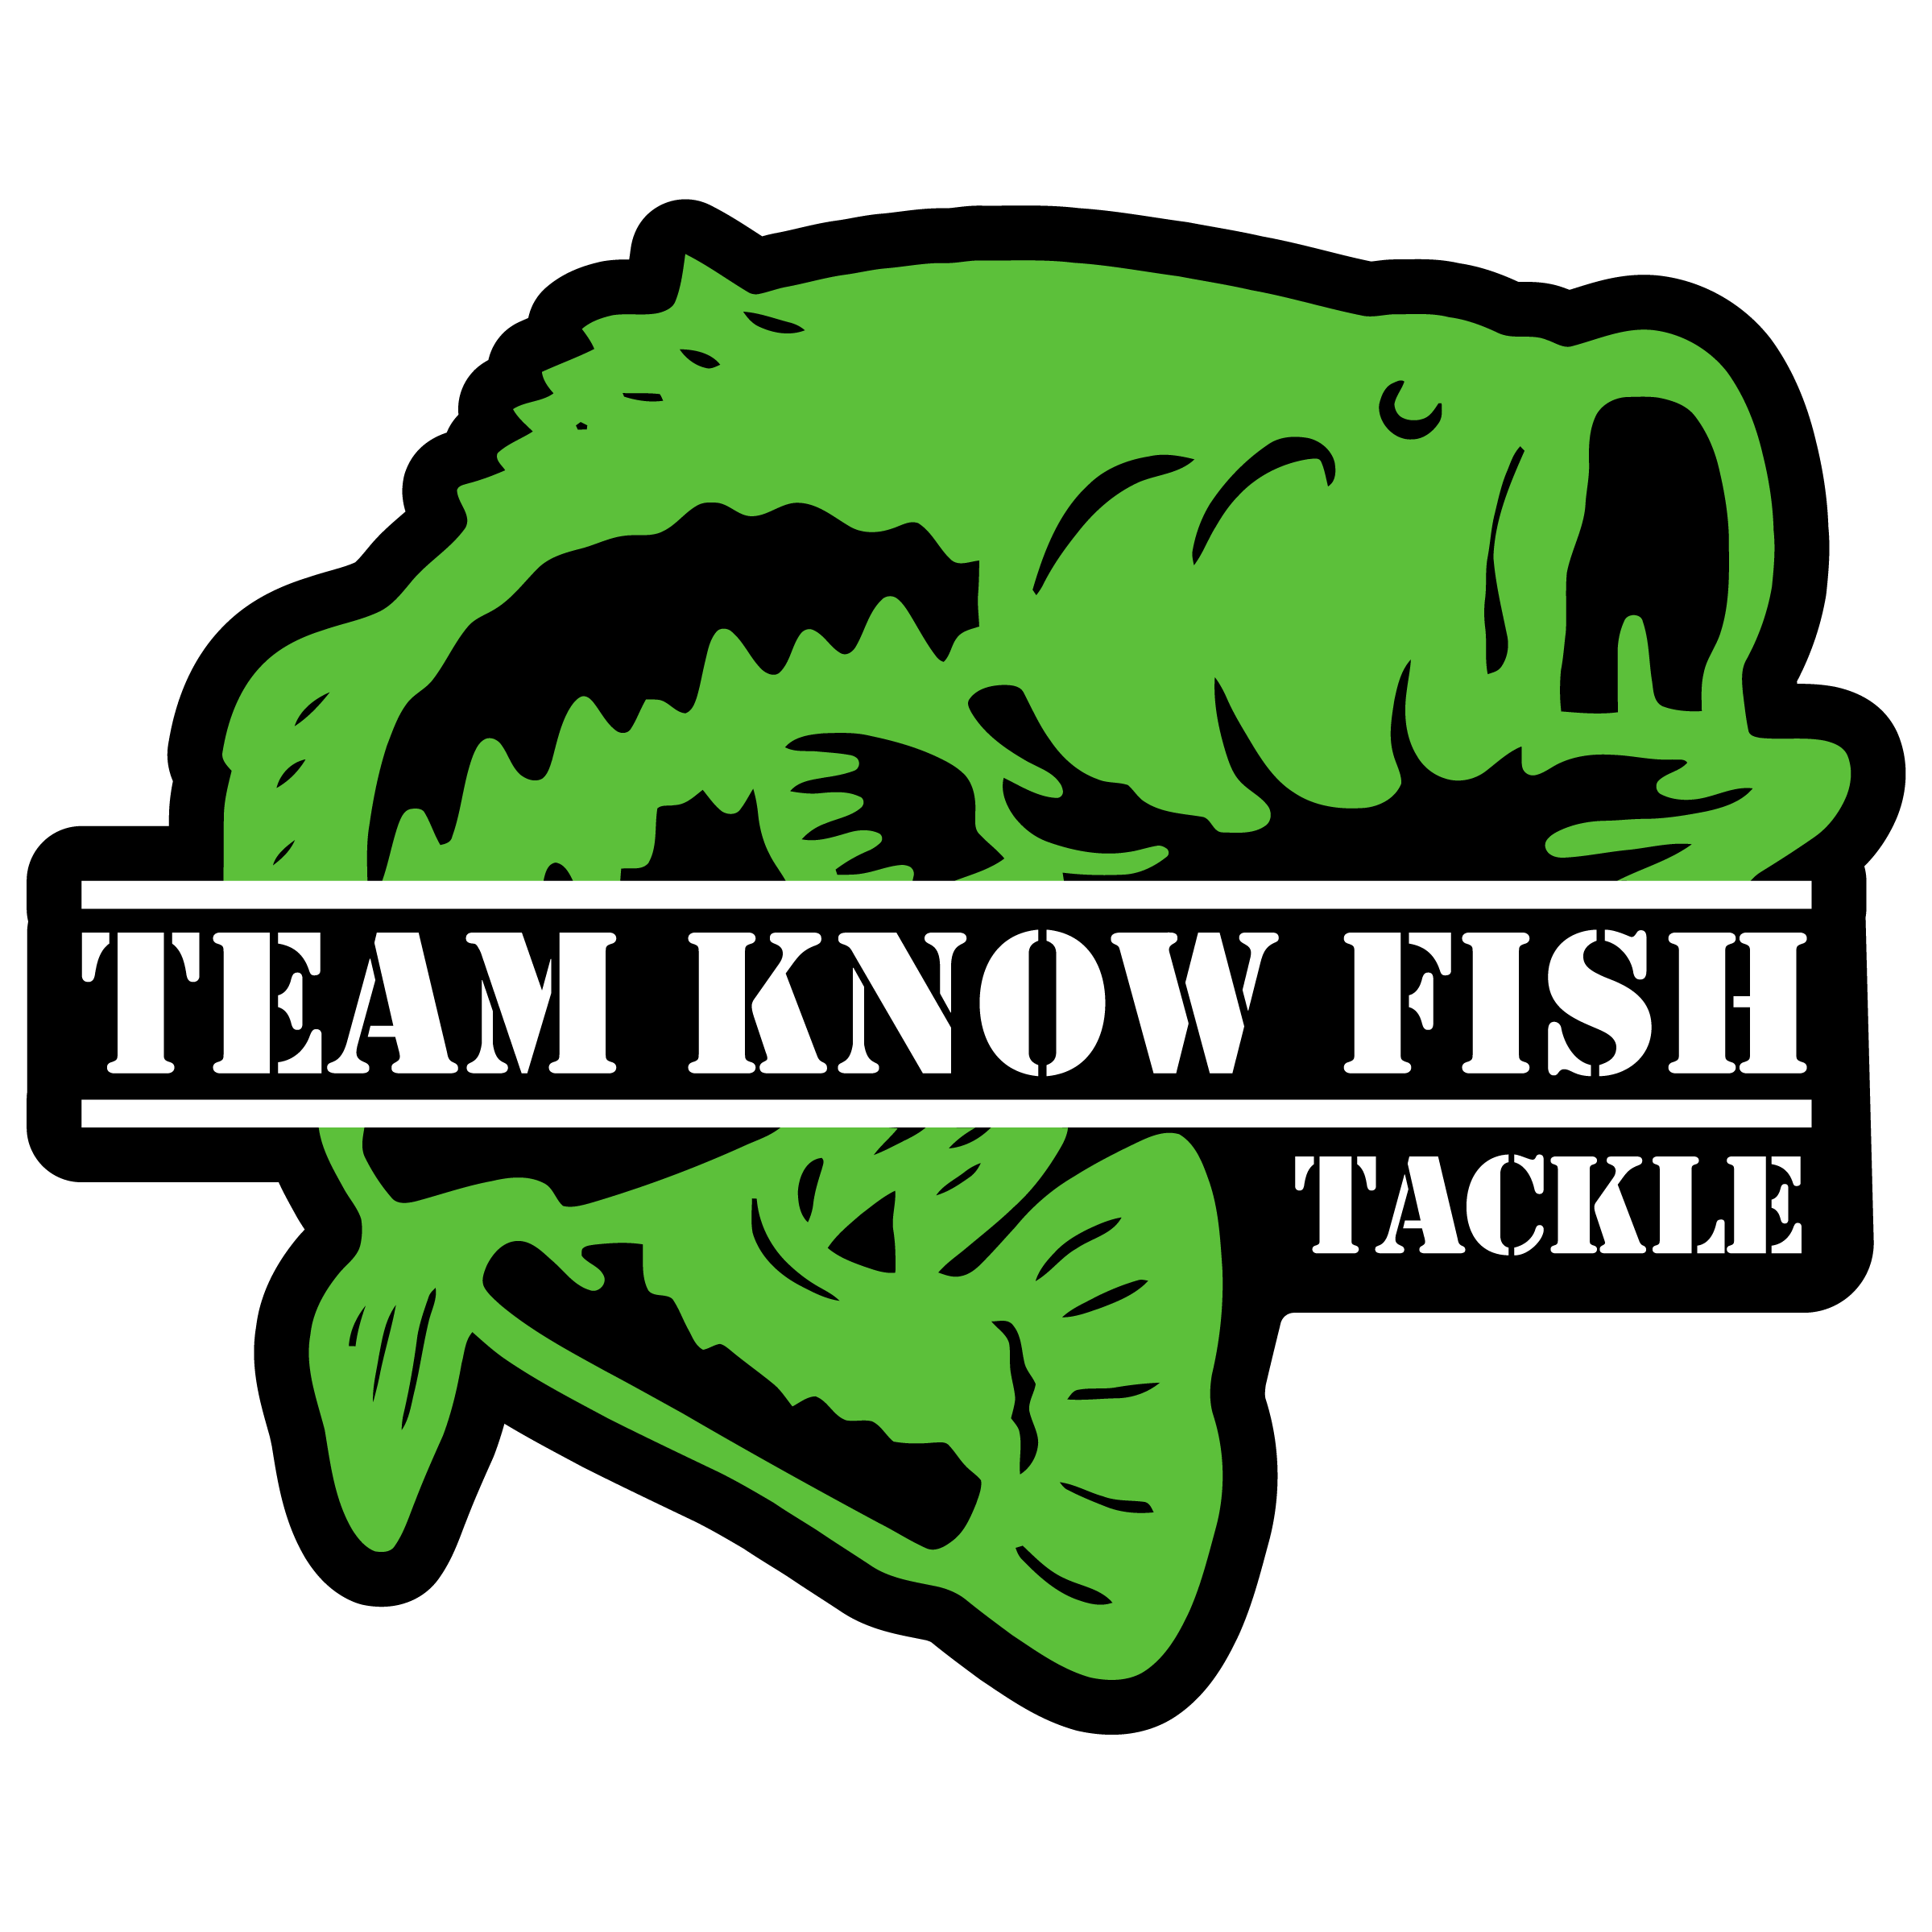 TeamKnowfish Tackle “Functionality Above Everything”